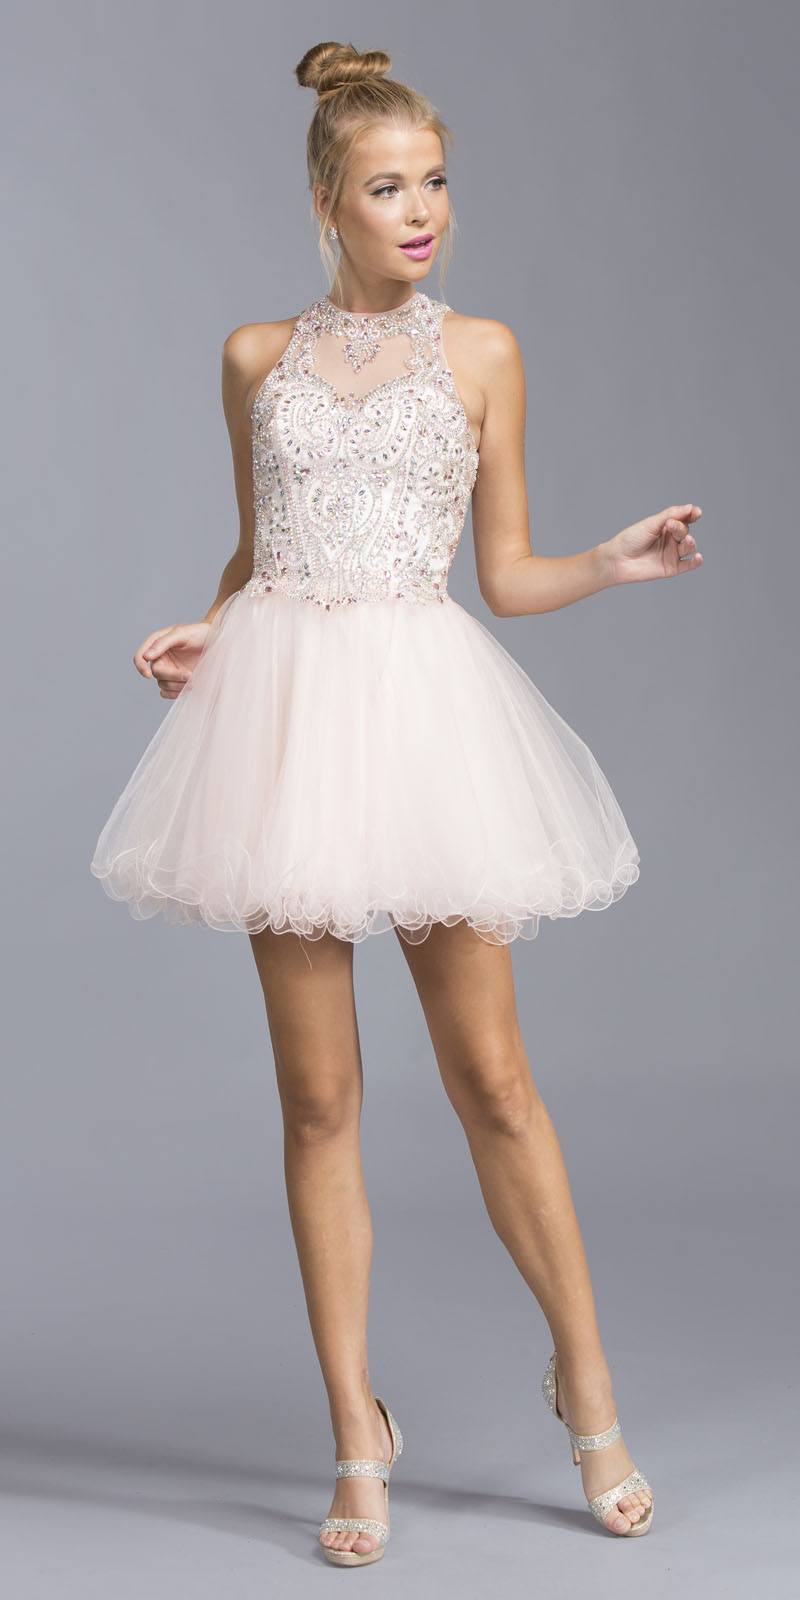 Illusion High Neckline Cut-Out Back Short Homecoming Dress